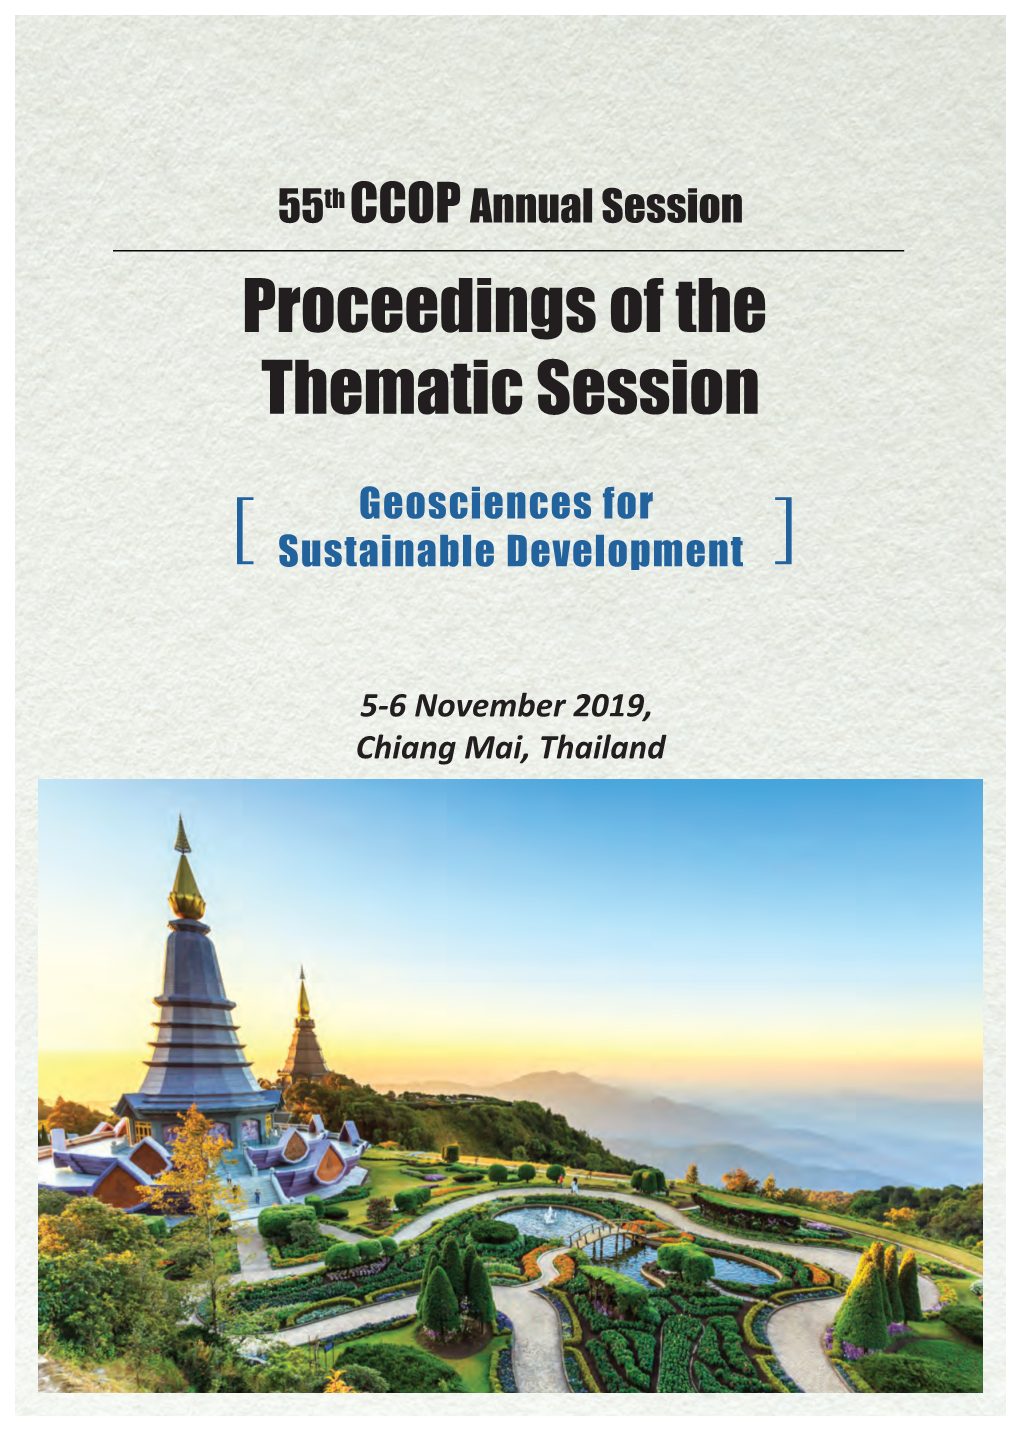 Proceedings of the 55Th CCOP Annual Session Part II (Thematic Session)